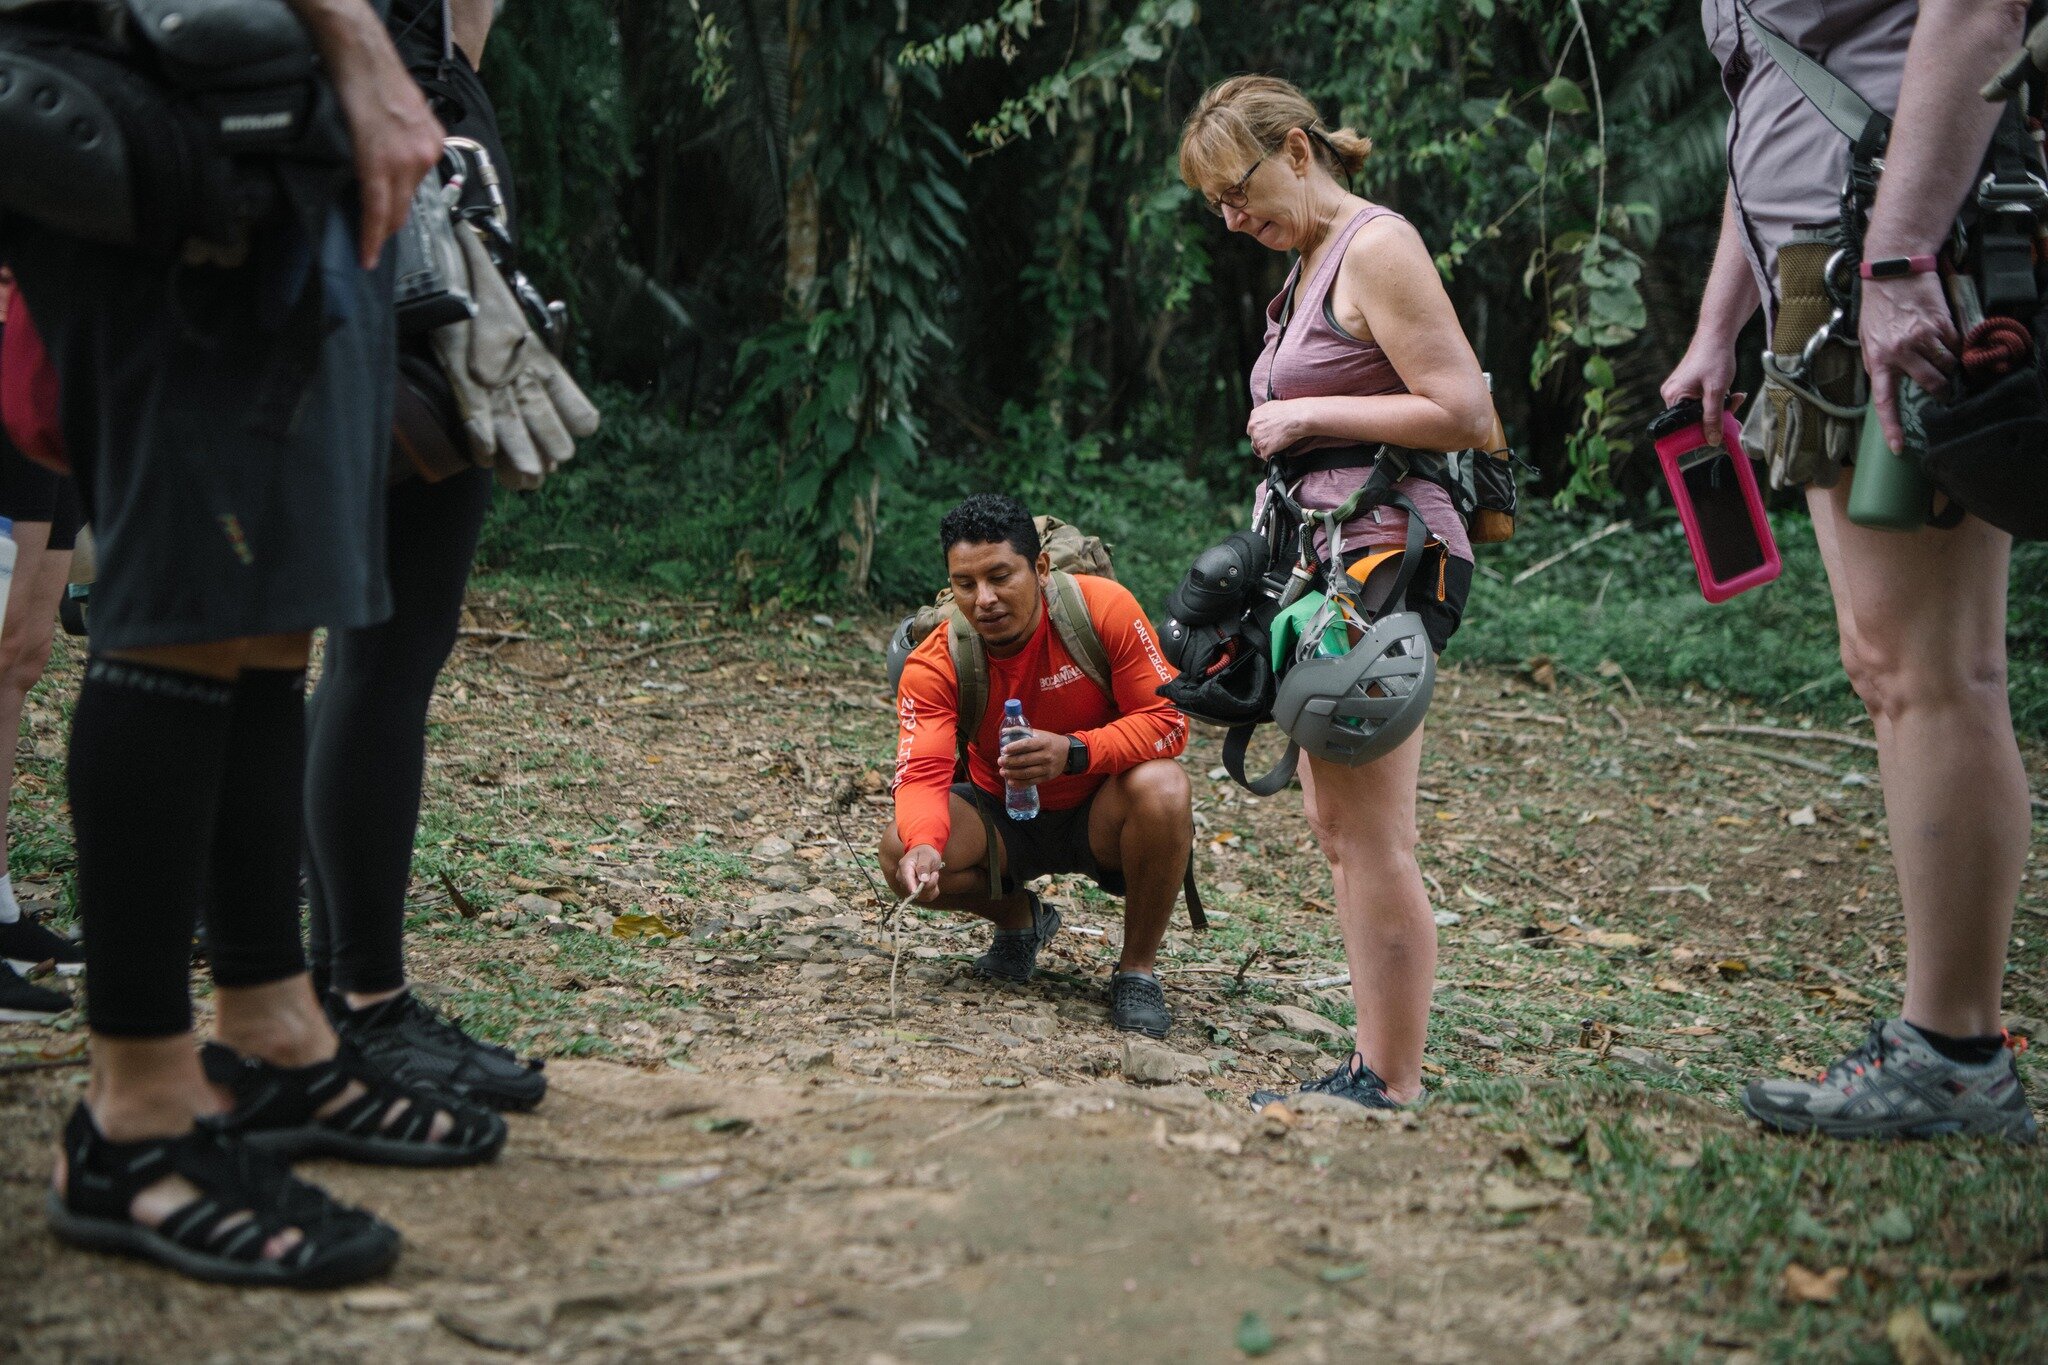 Stepped into the heart of the wild at Bocawina Rainforest Resort with their expert-guided nature hikes 🌿🥾 Our knowledgeable guide led us through the lush trails, unveiling the secrets of the endemic fauna and flora of this breathtaking national par